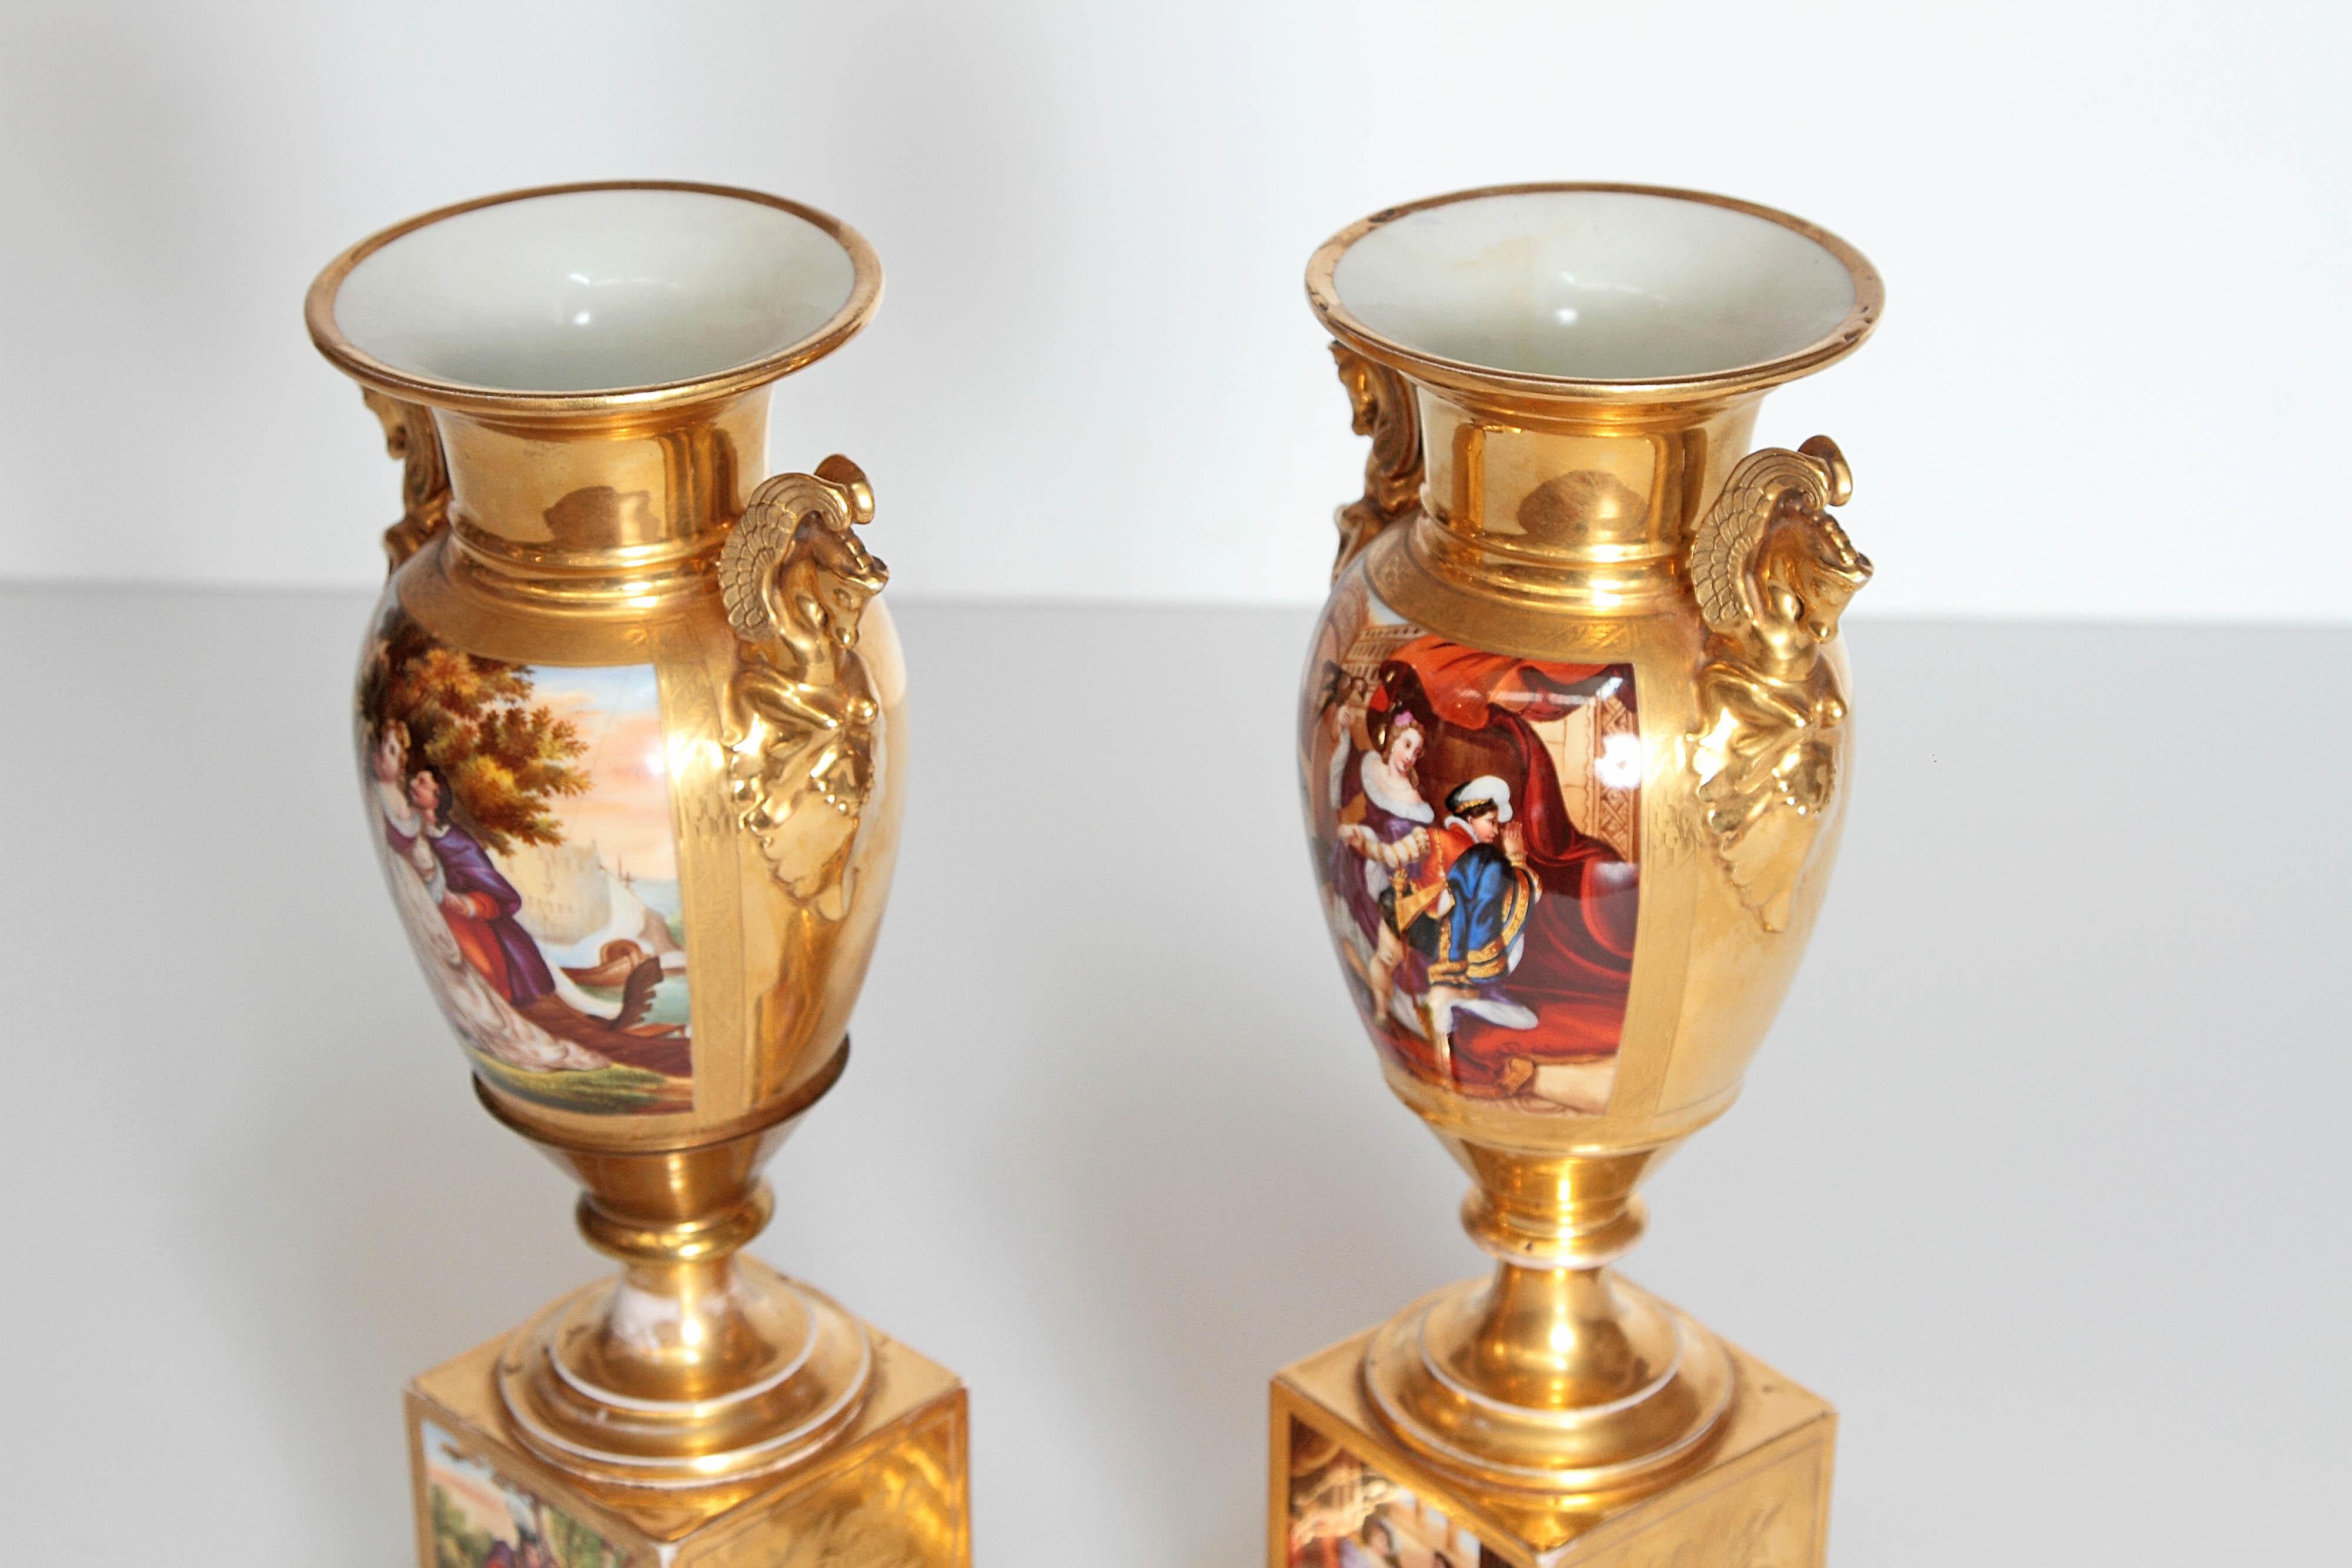 Neoclassical 19th Century Pair of French Porcelain Gilt Urns with Scenes